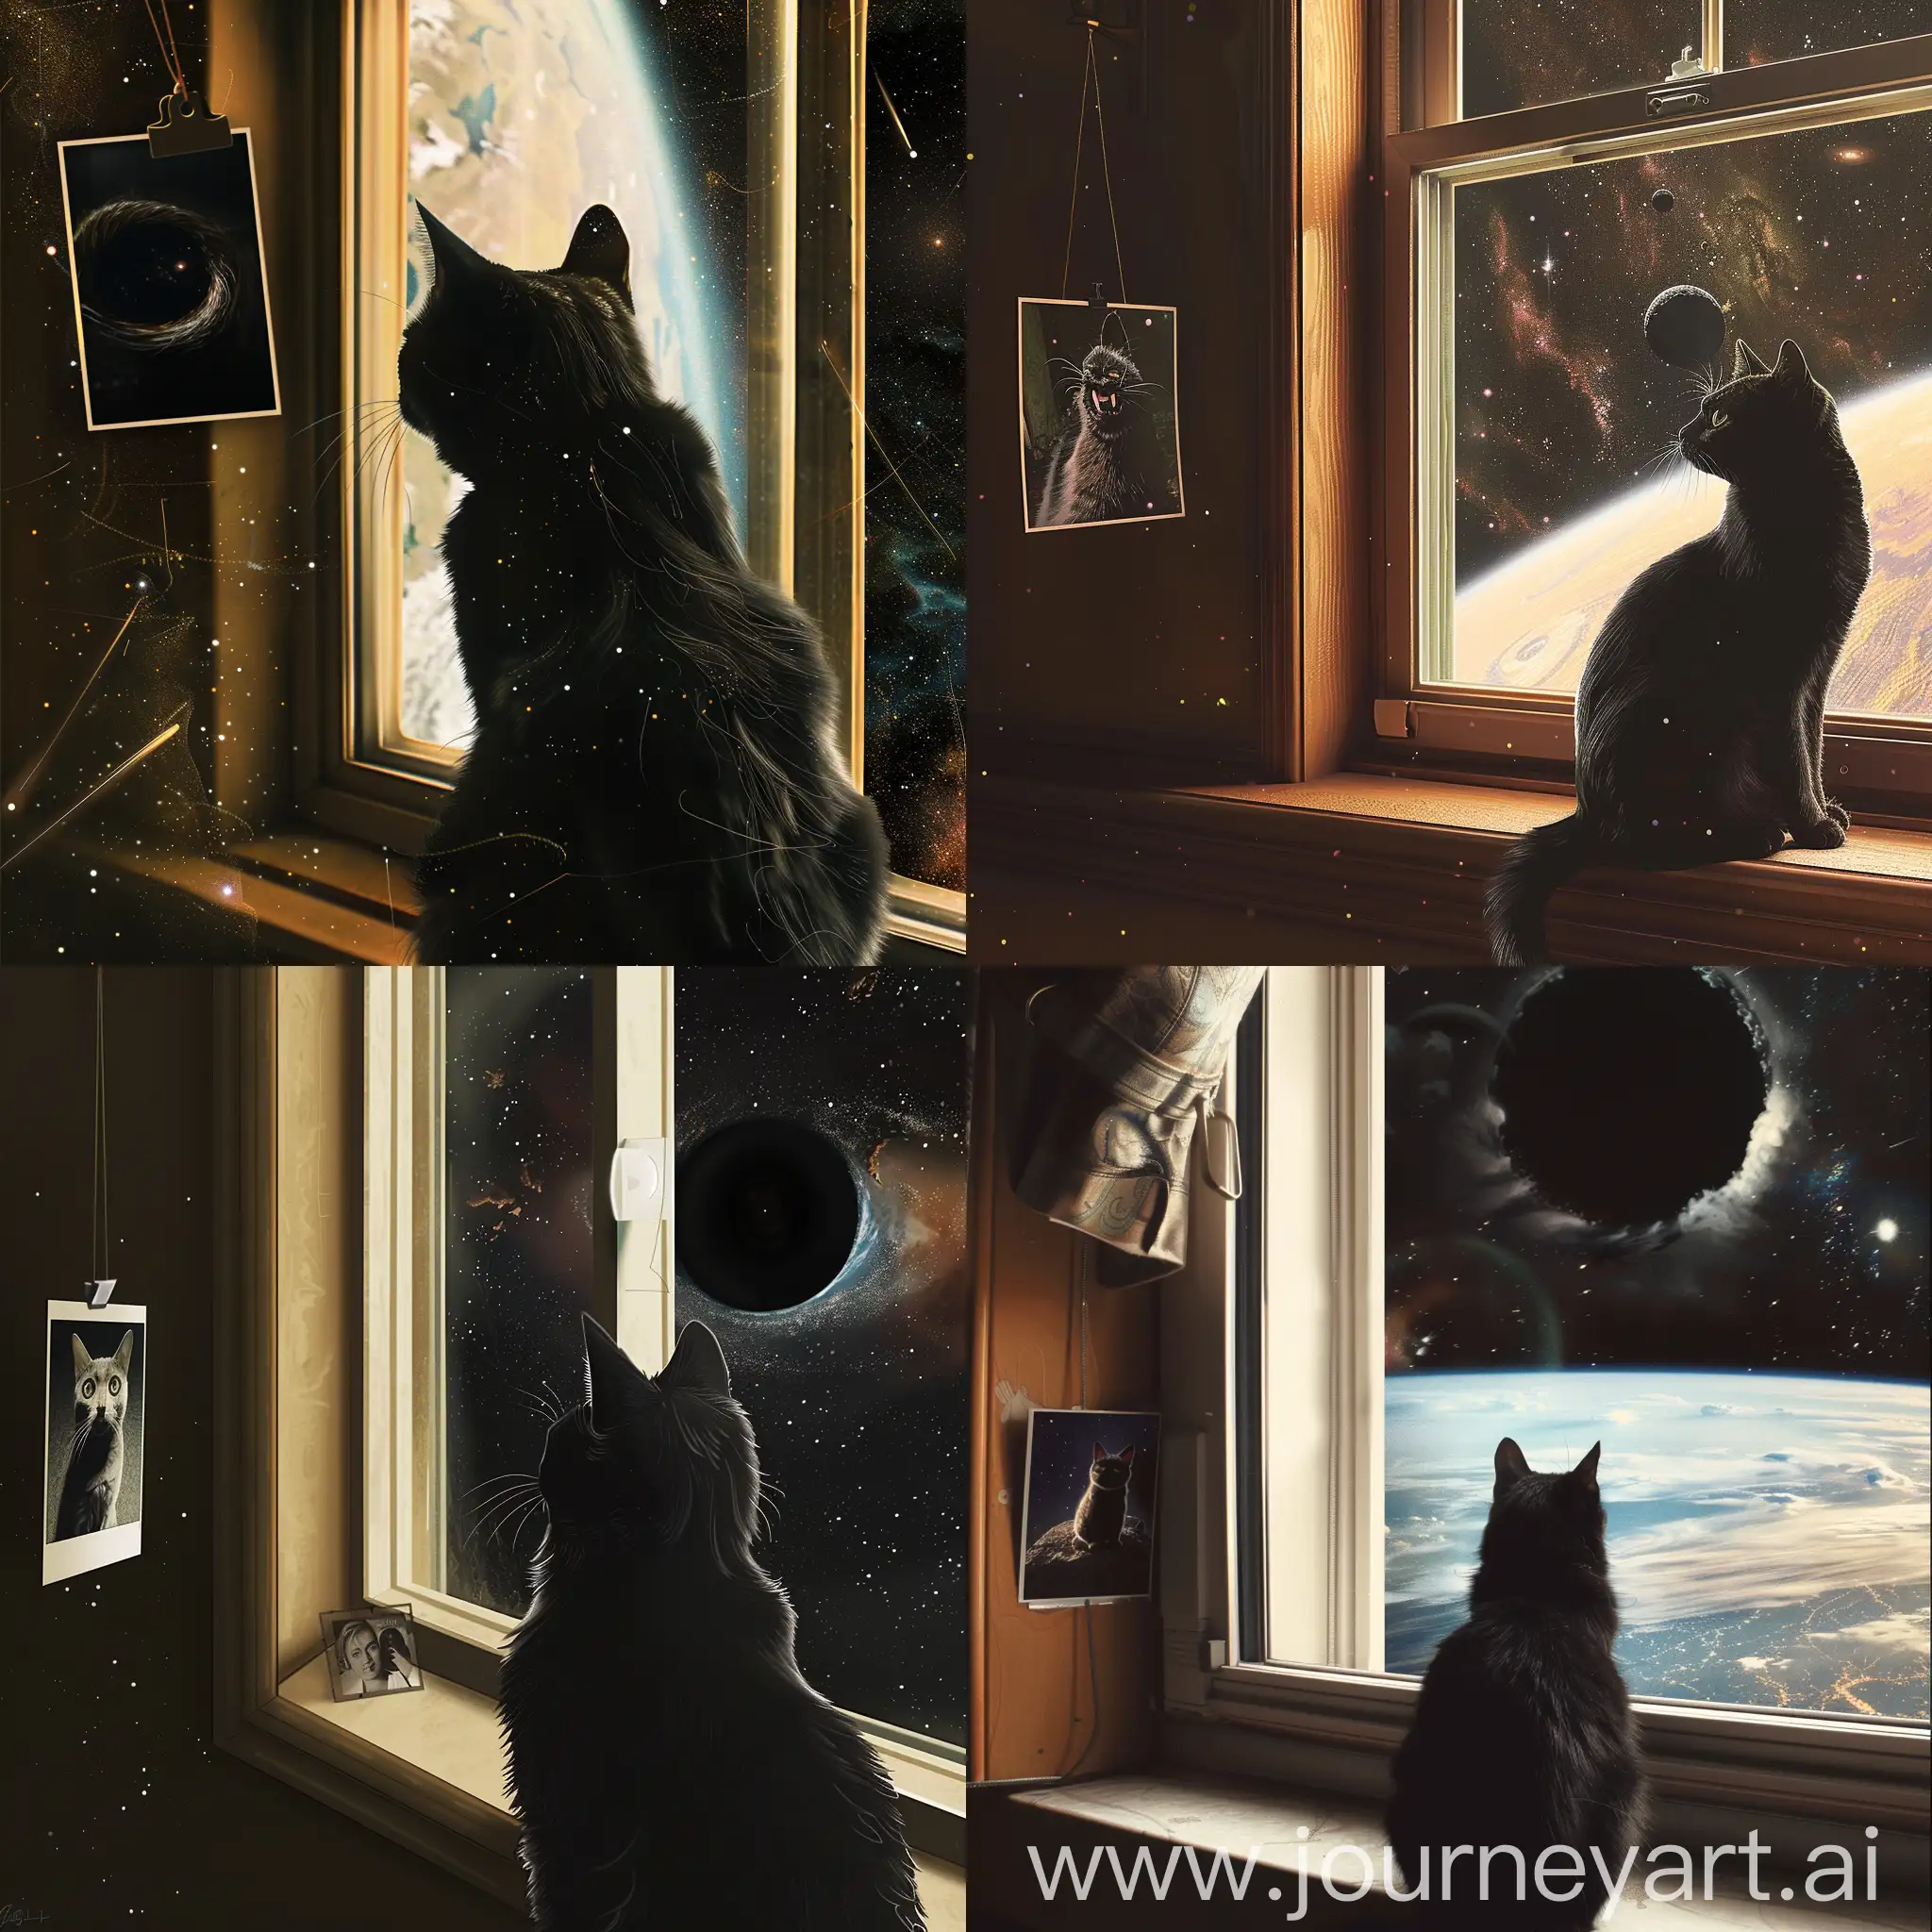 Black-Cat-Gazing-into-Space-through-Window-with-Black-Hole-and-Cat-Photo